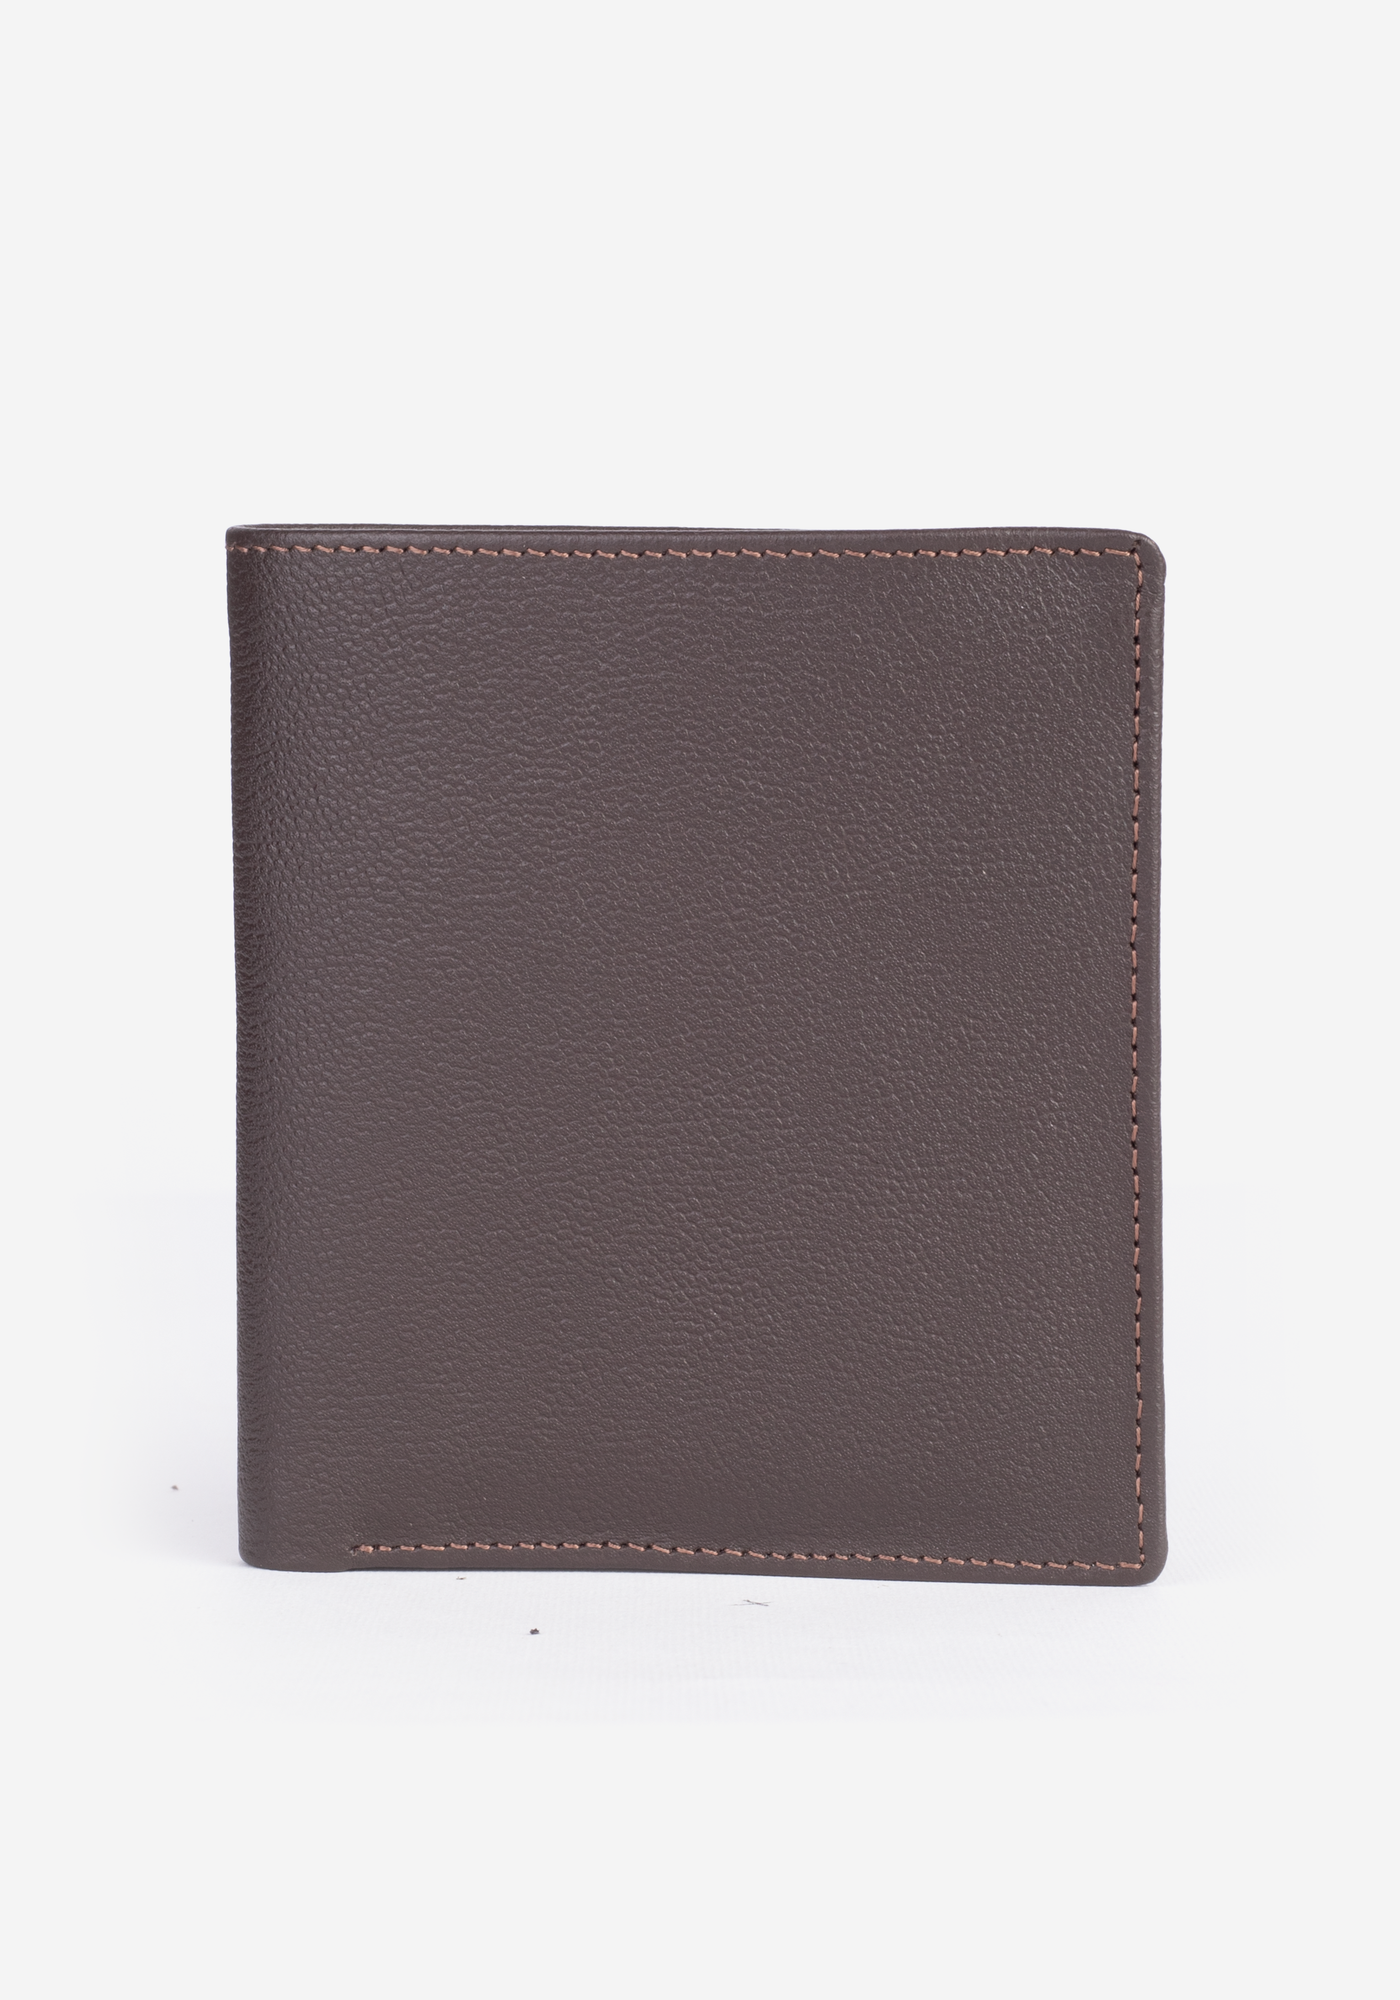 WAL024 / Brown Leather Wallet